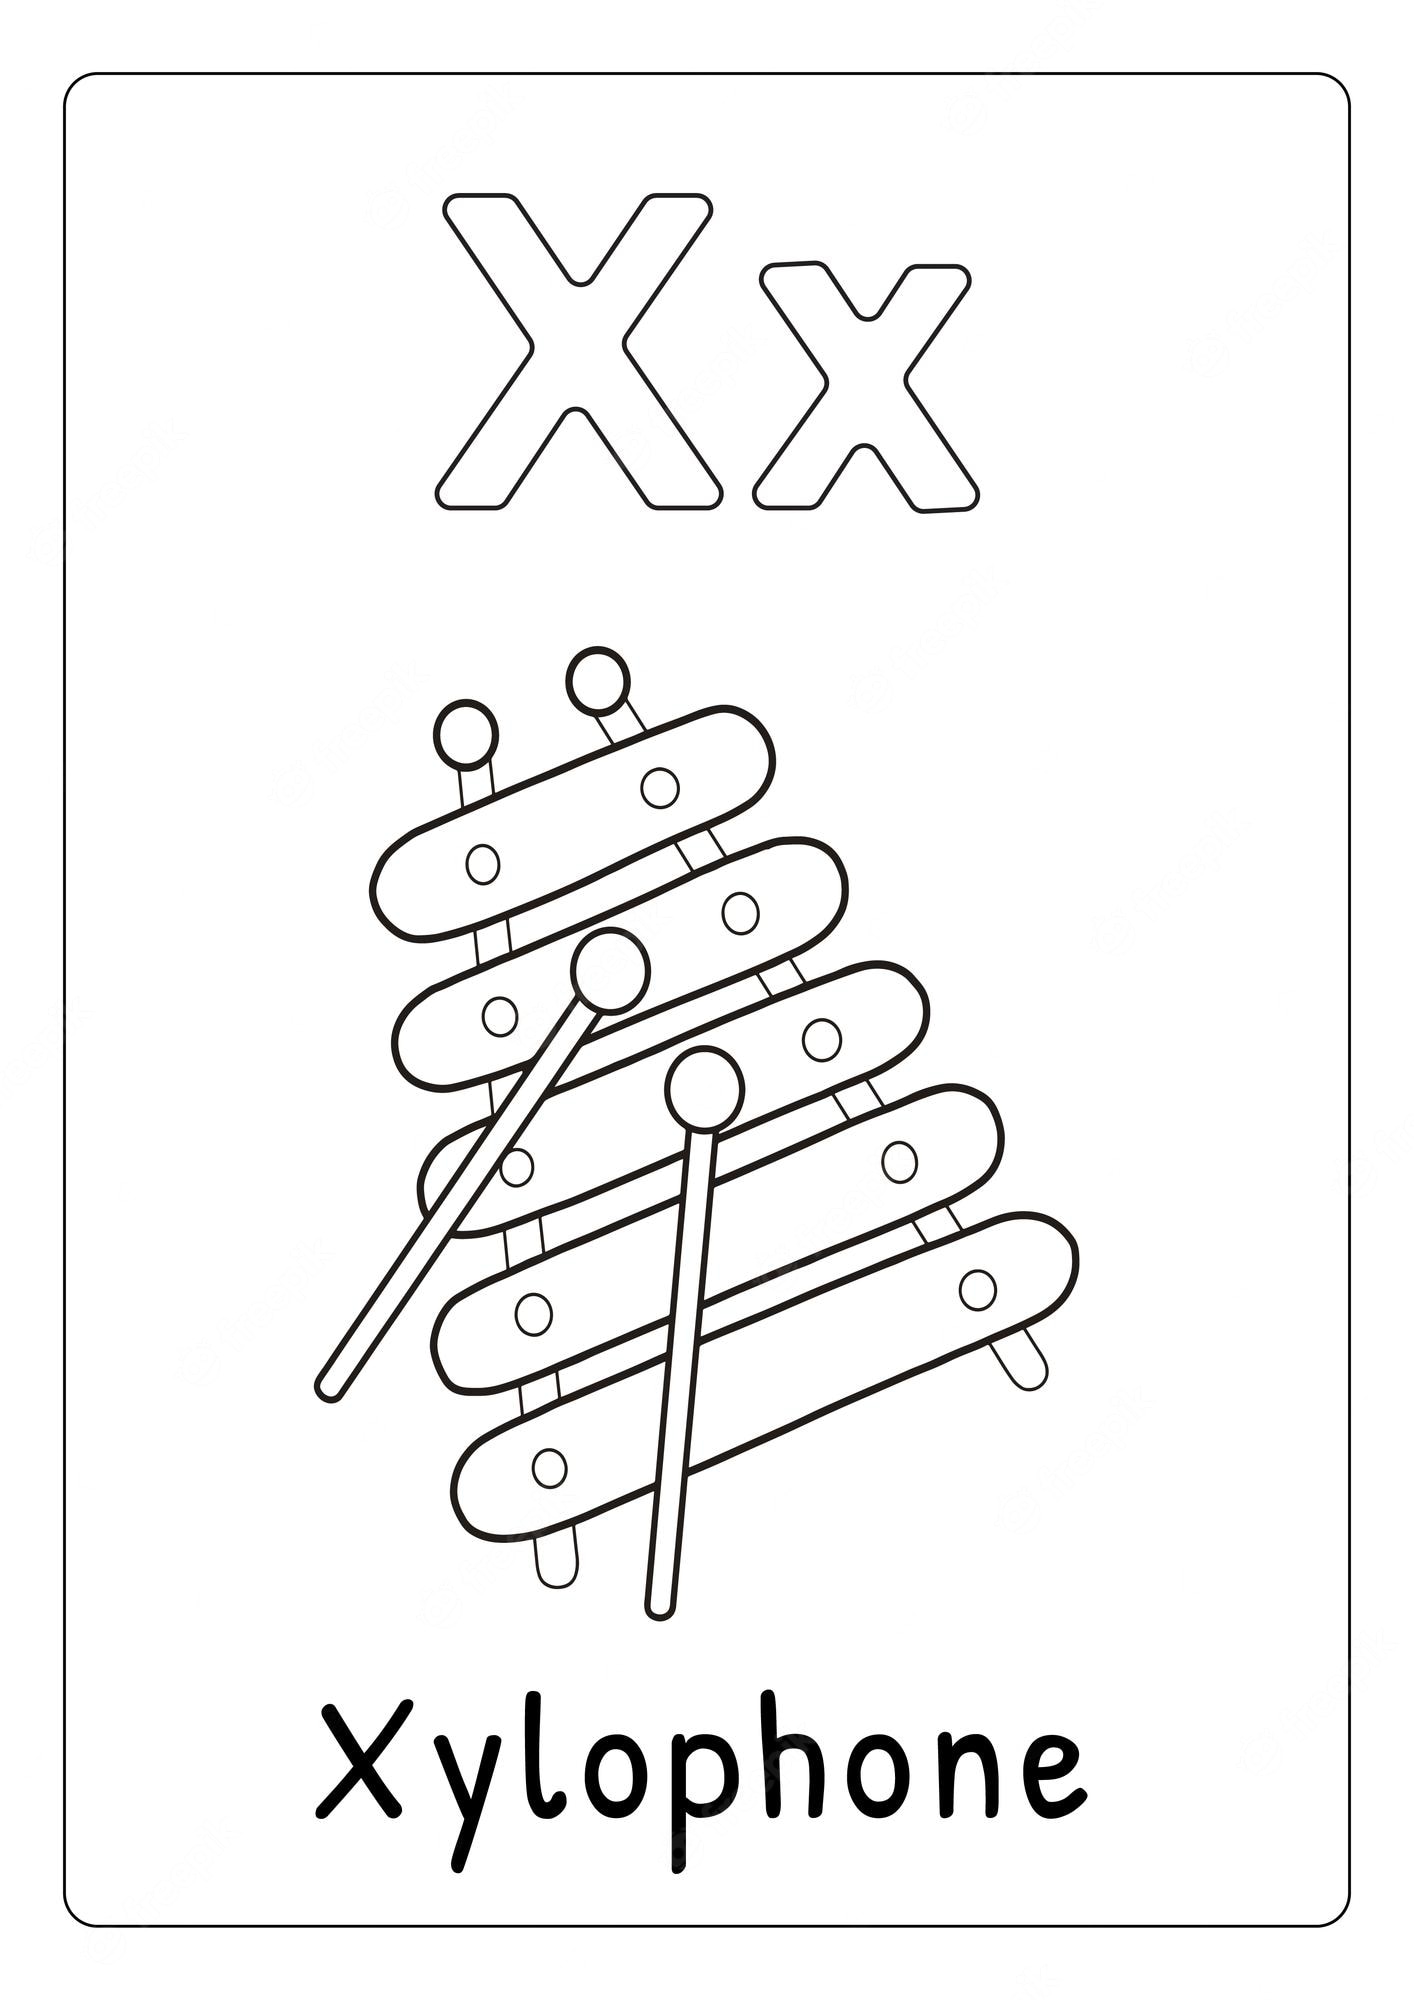 Premium Vector | Alphabet letter x for xylophone coloring page for kids